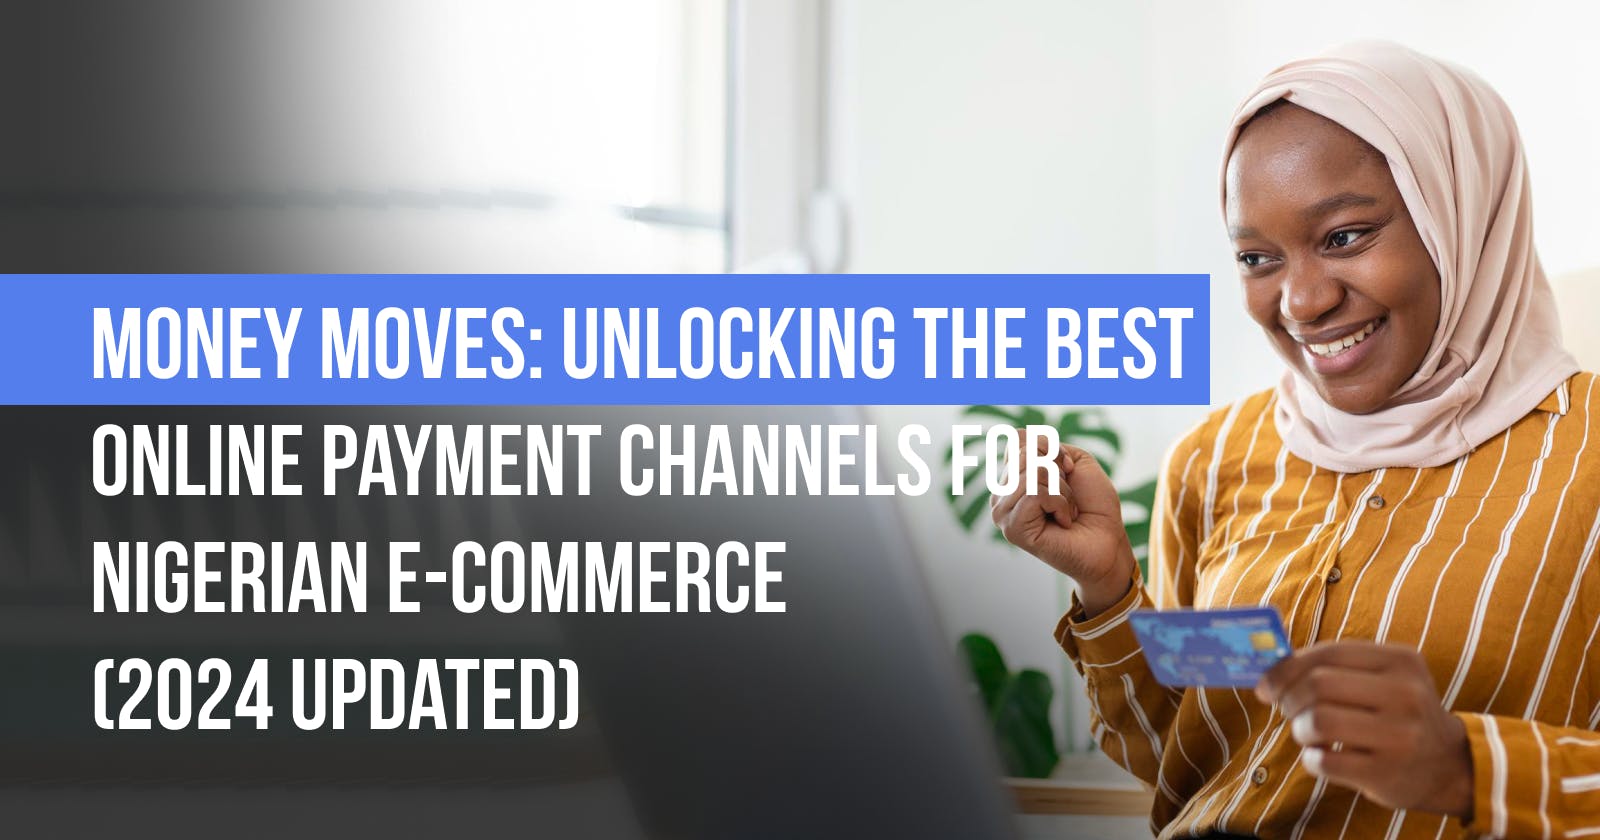 Money Moves: Unlocking the Best Online Payment Channels for Nigerian E-commerce (2024 Updated)